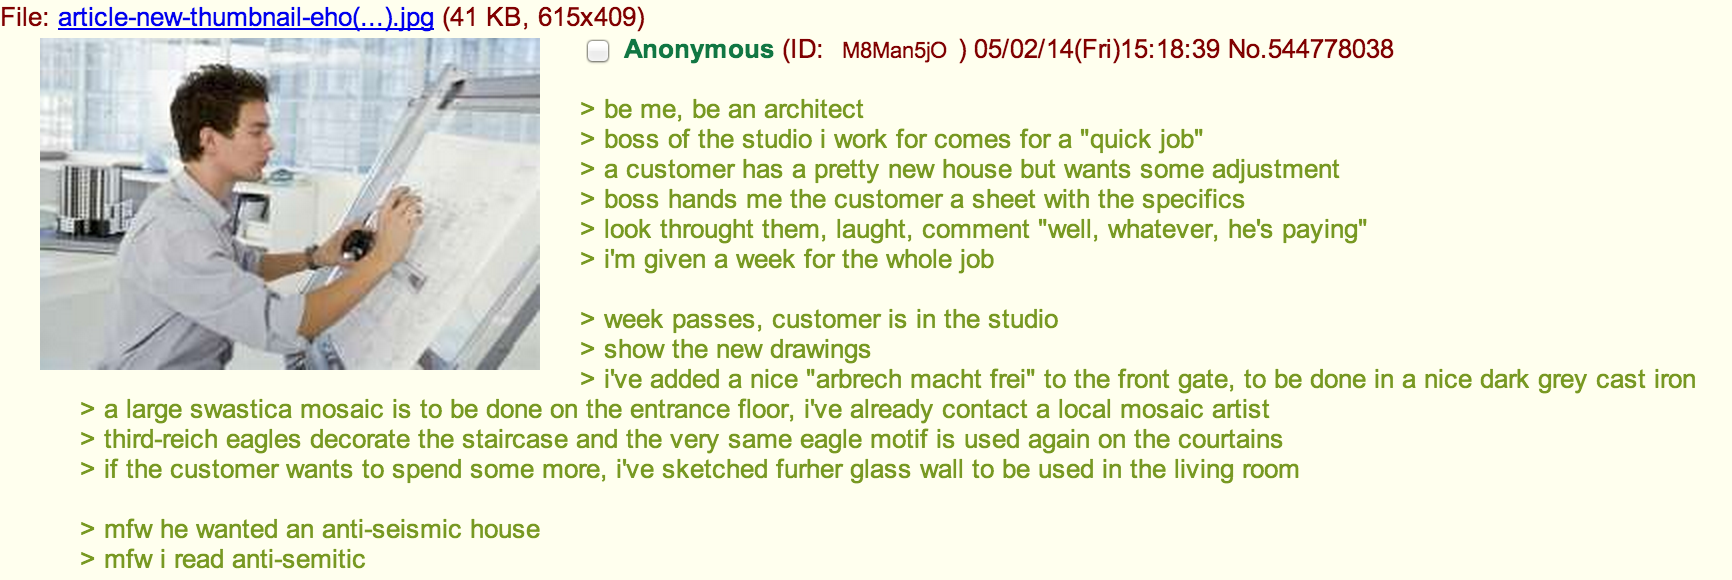 Anon is an architect